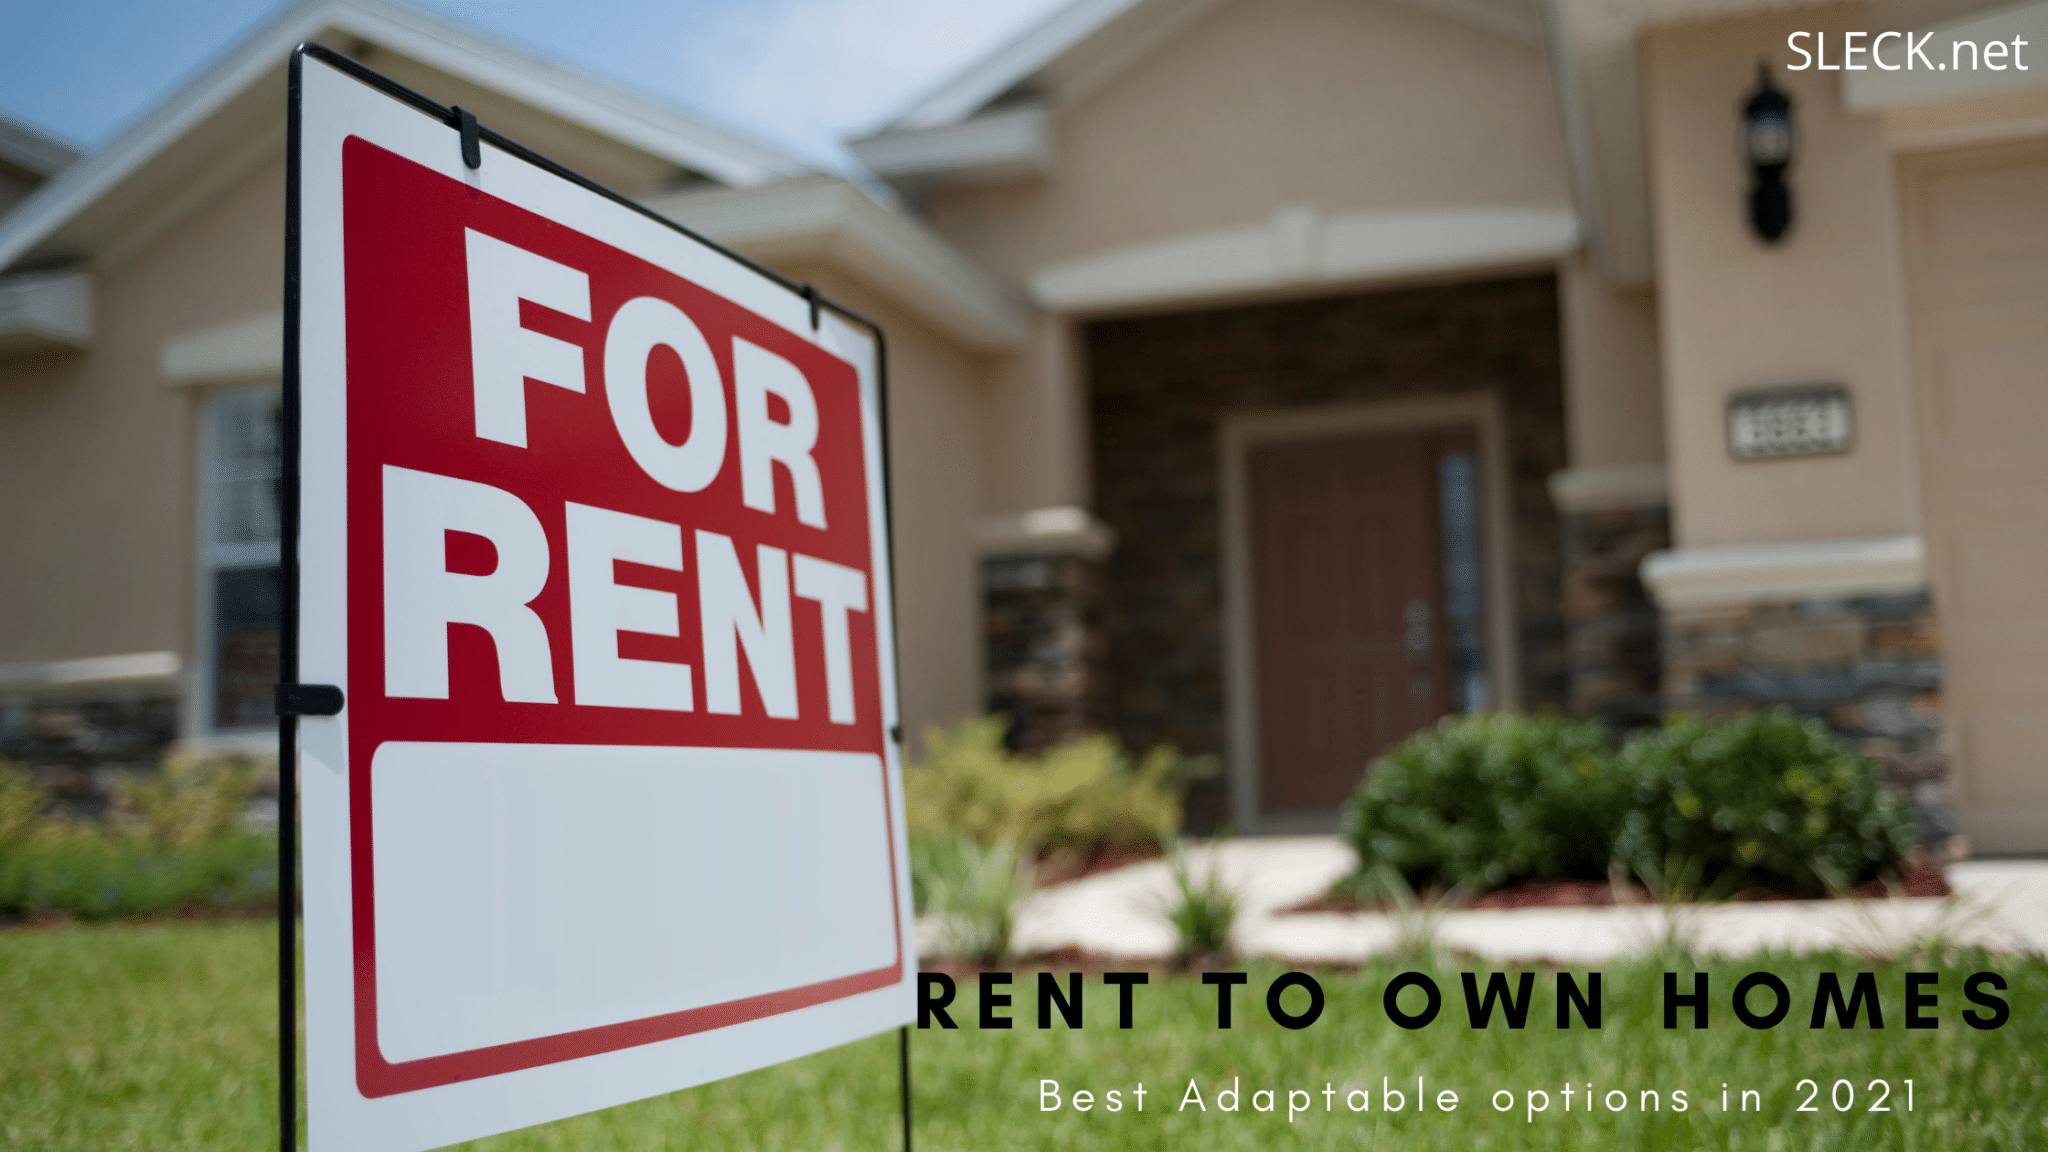 Rent To Own Homes | Best Adaptable options in 2021